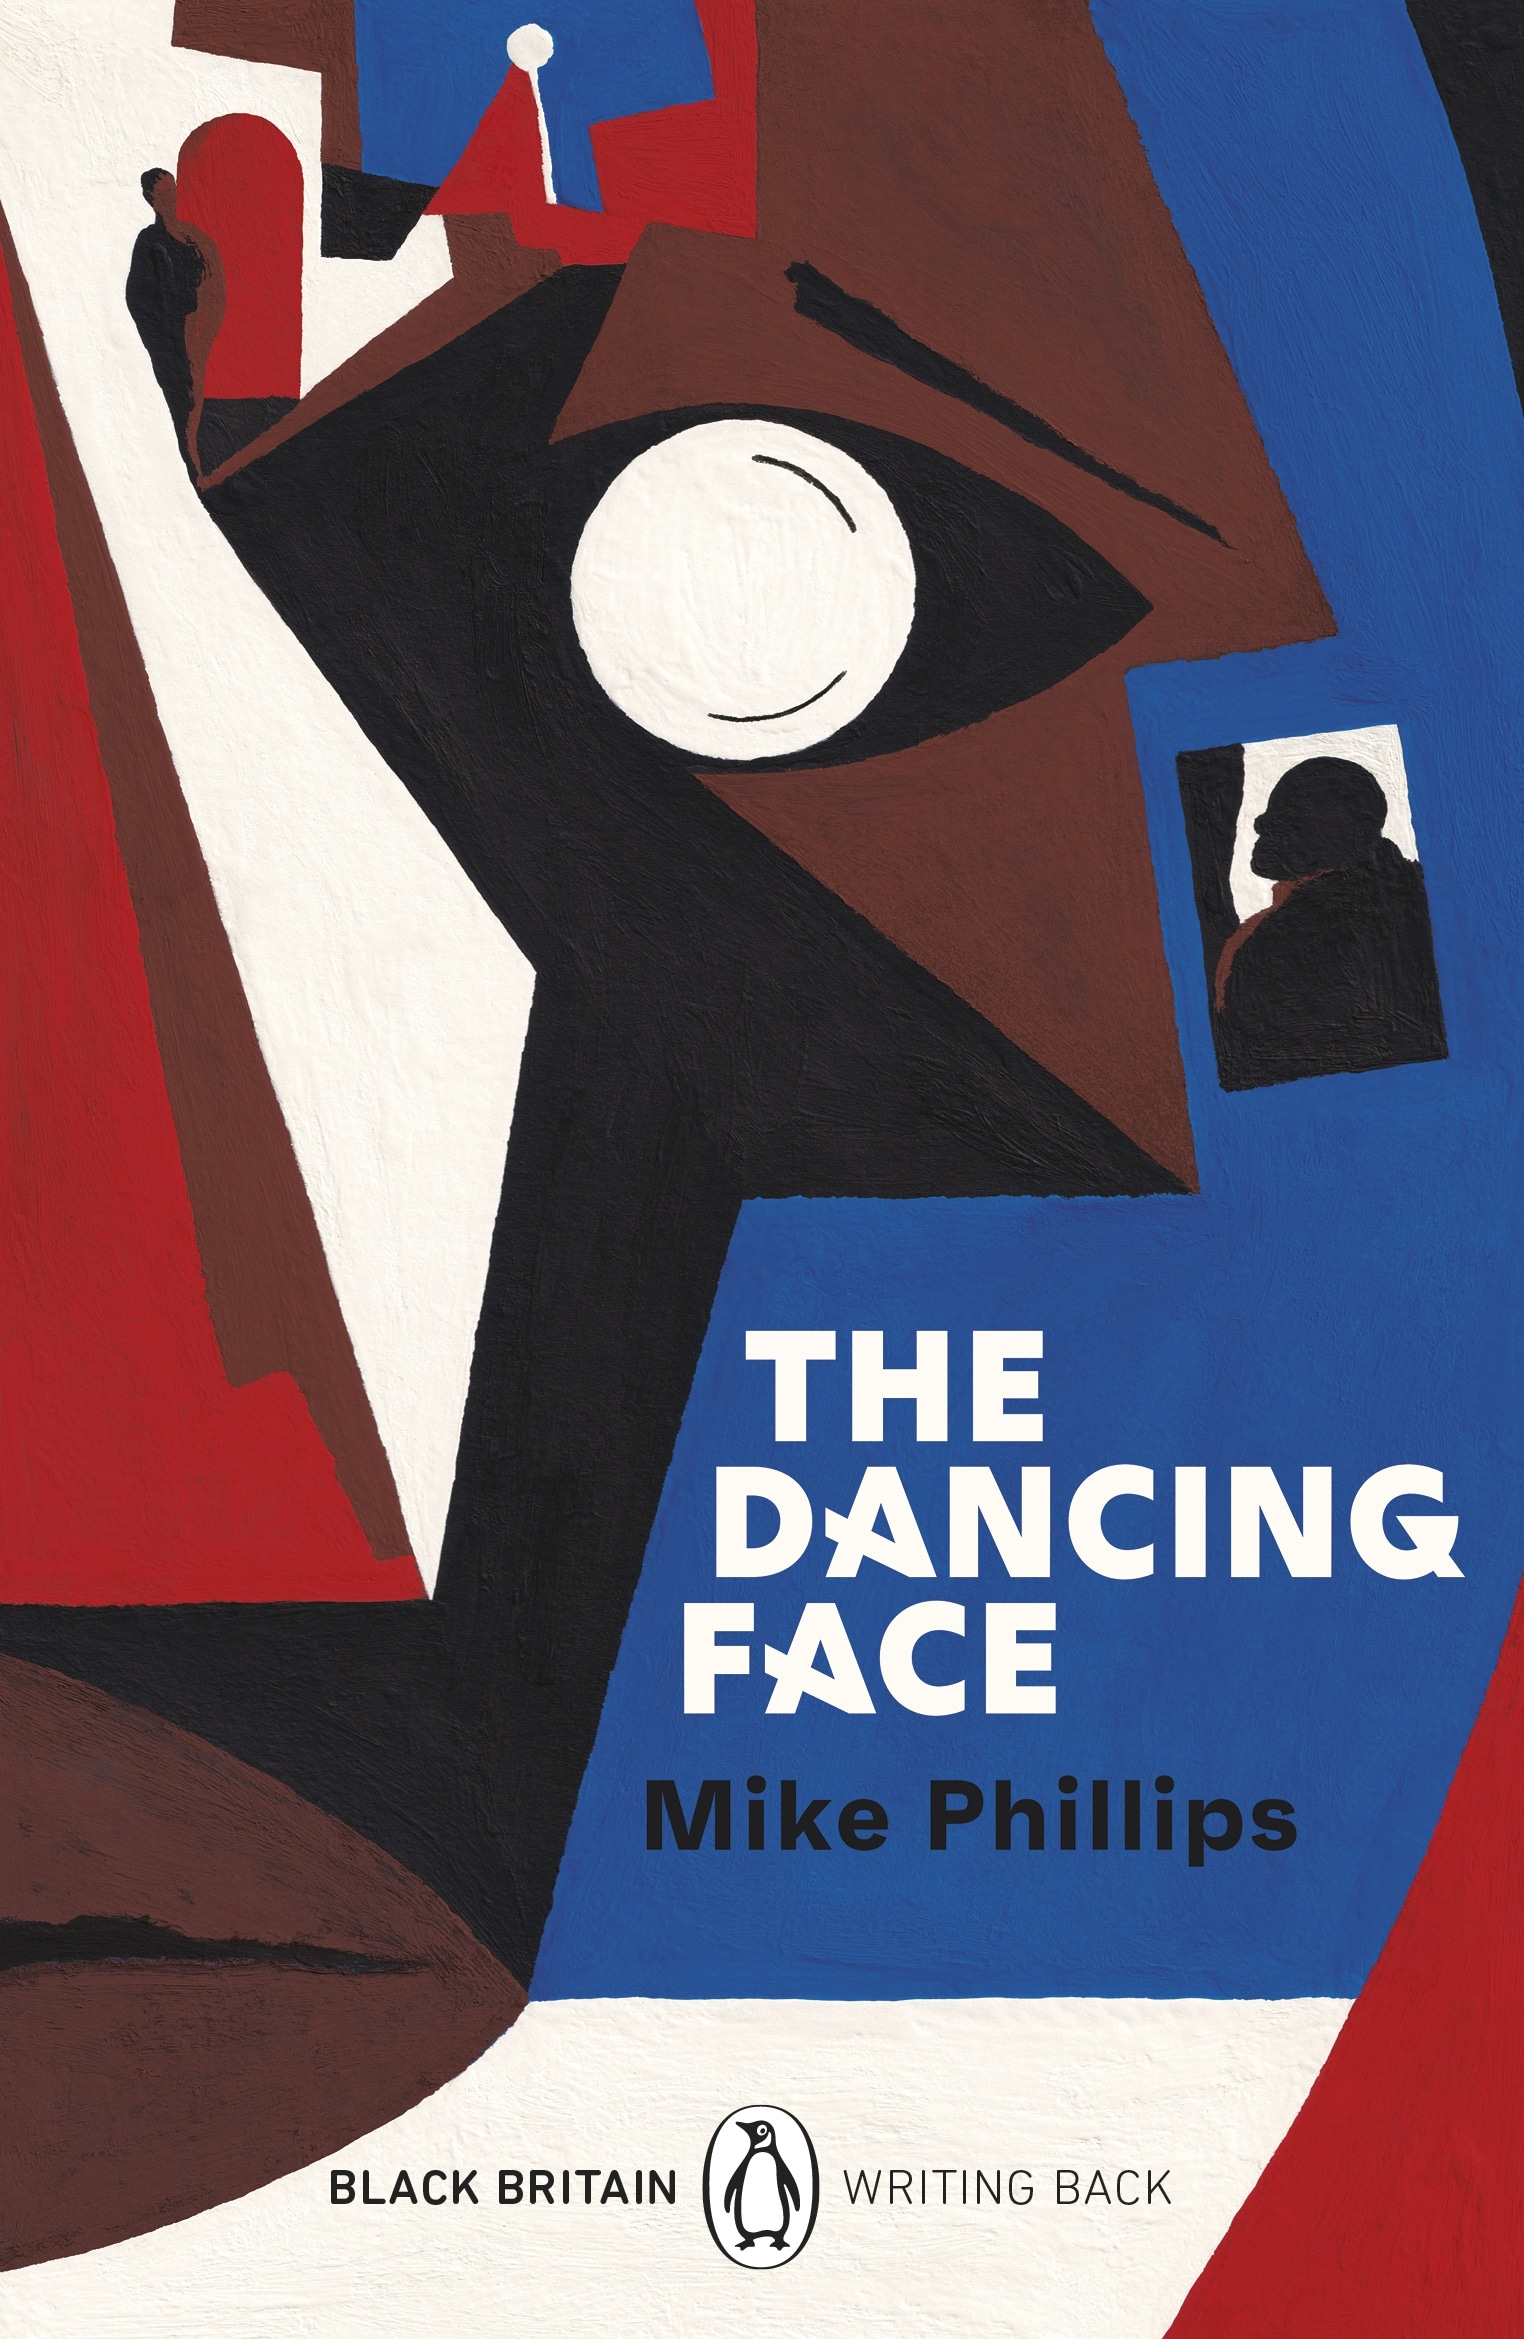 Book “The Dancing Face” by Mike Phillips, Bernardine Evaristo — February 4, 2021